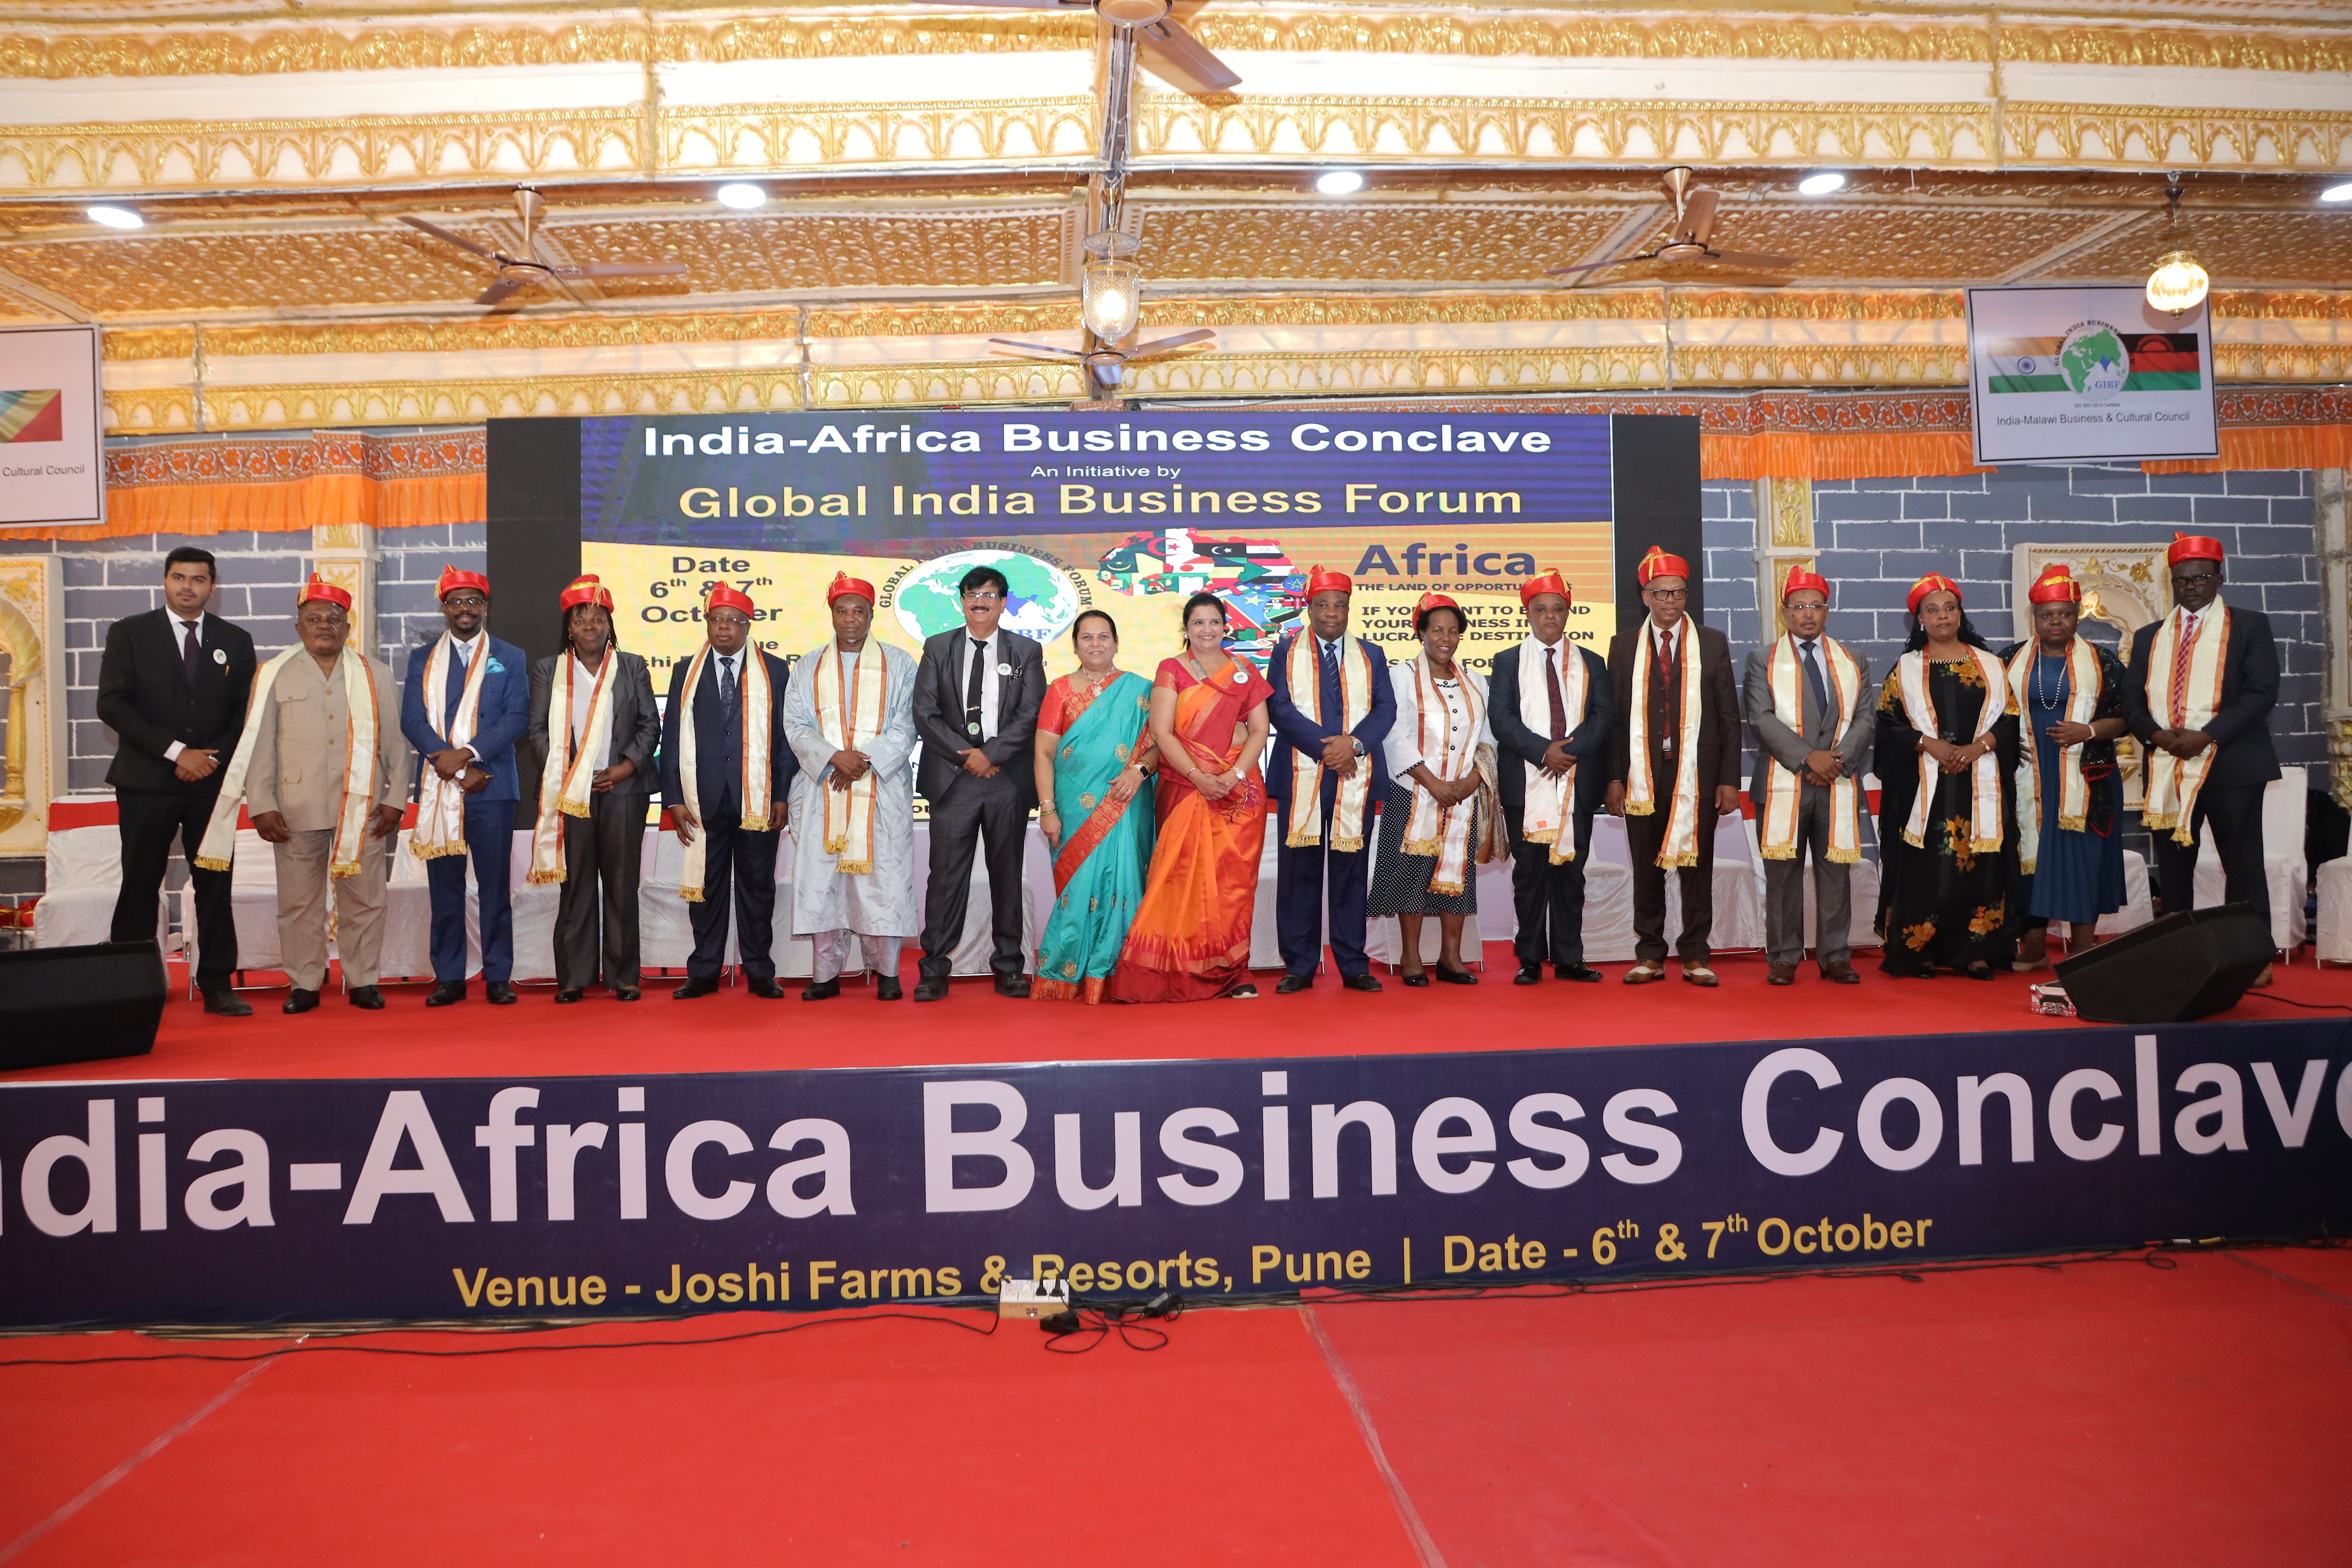 grow-together-is-a-success-mantra-for-futuristic-business-between-india-africa-dr-jitendra-joshi